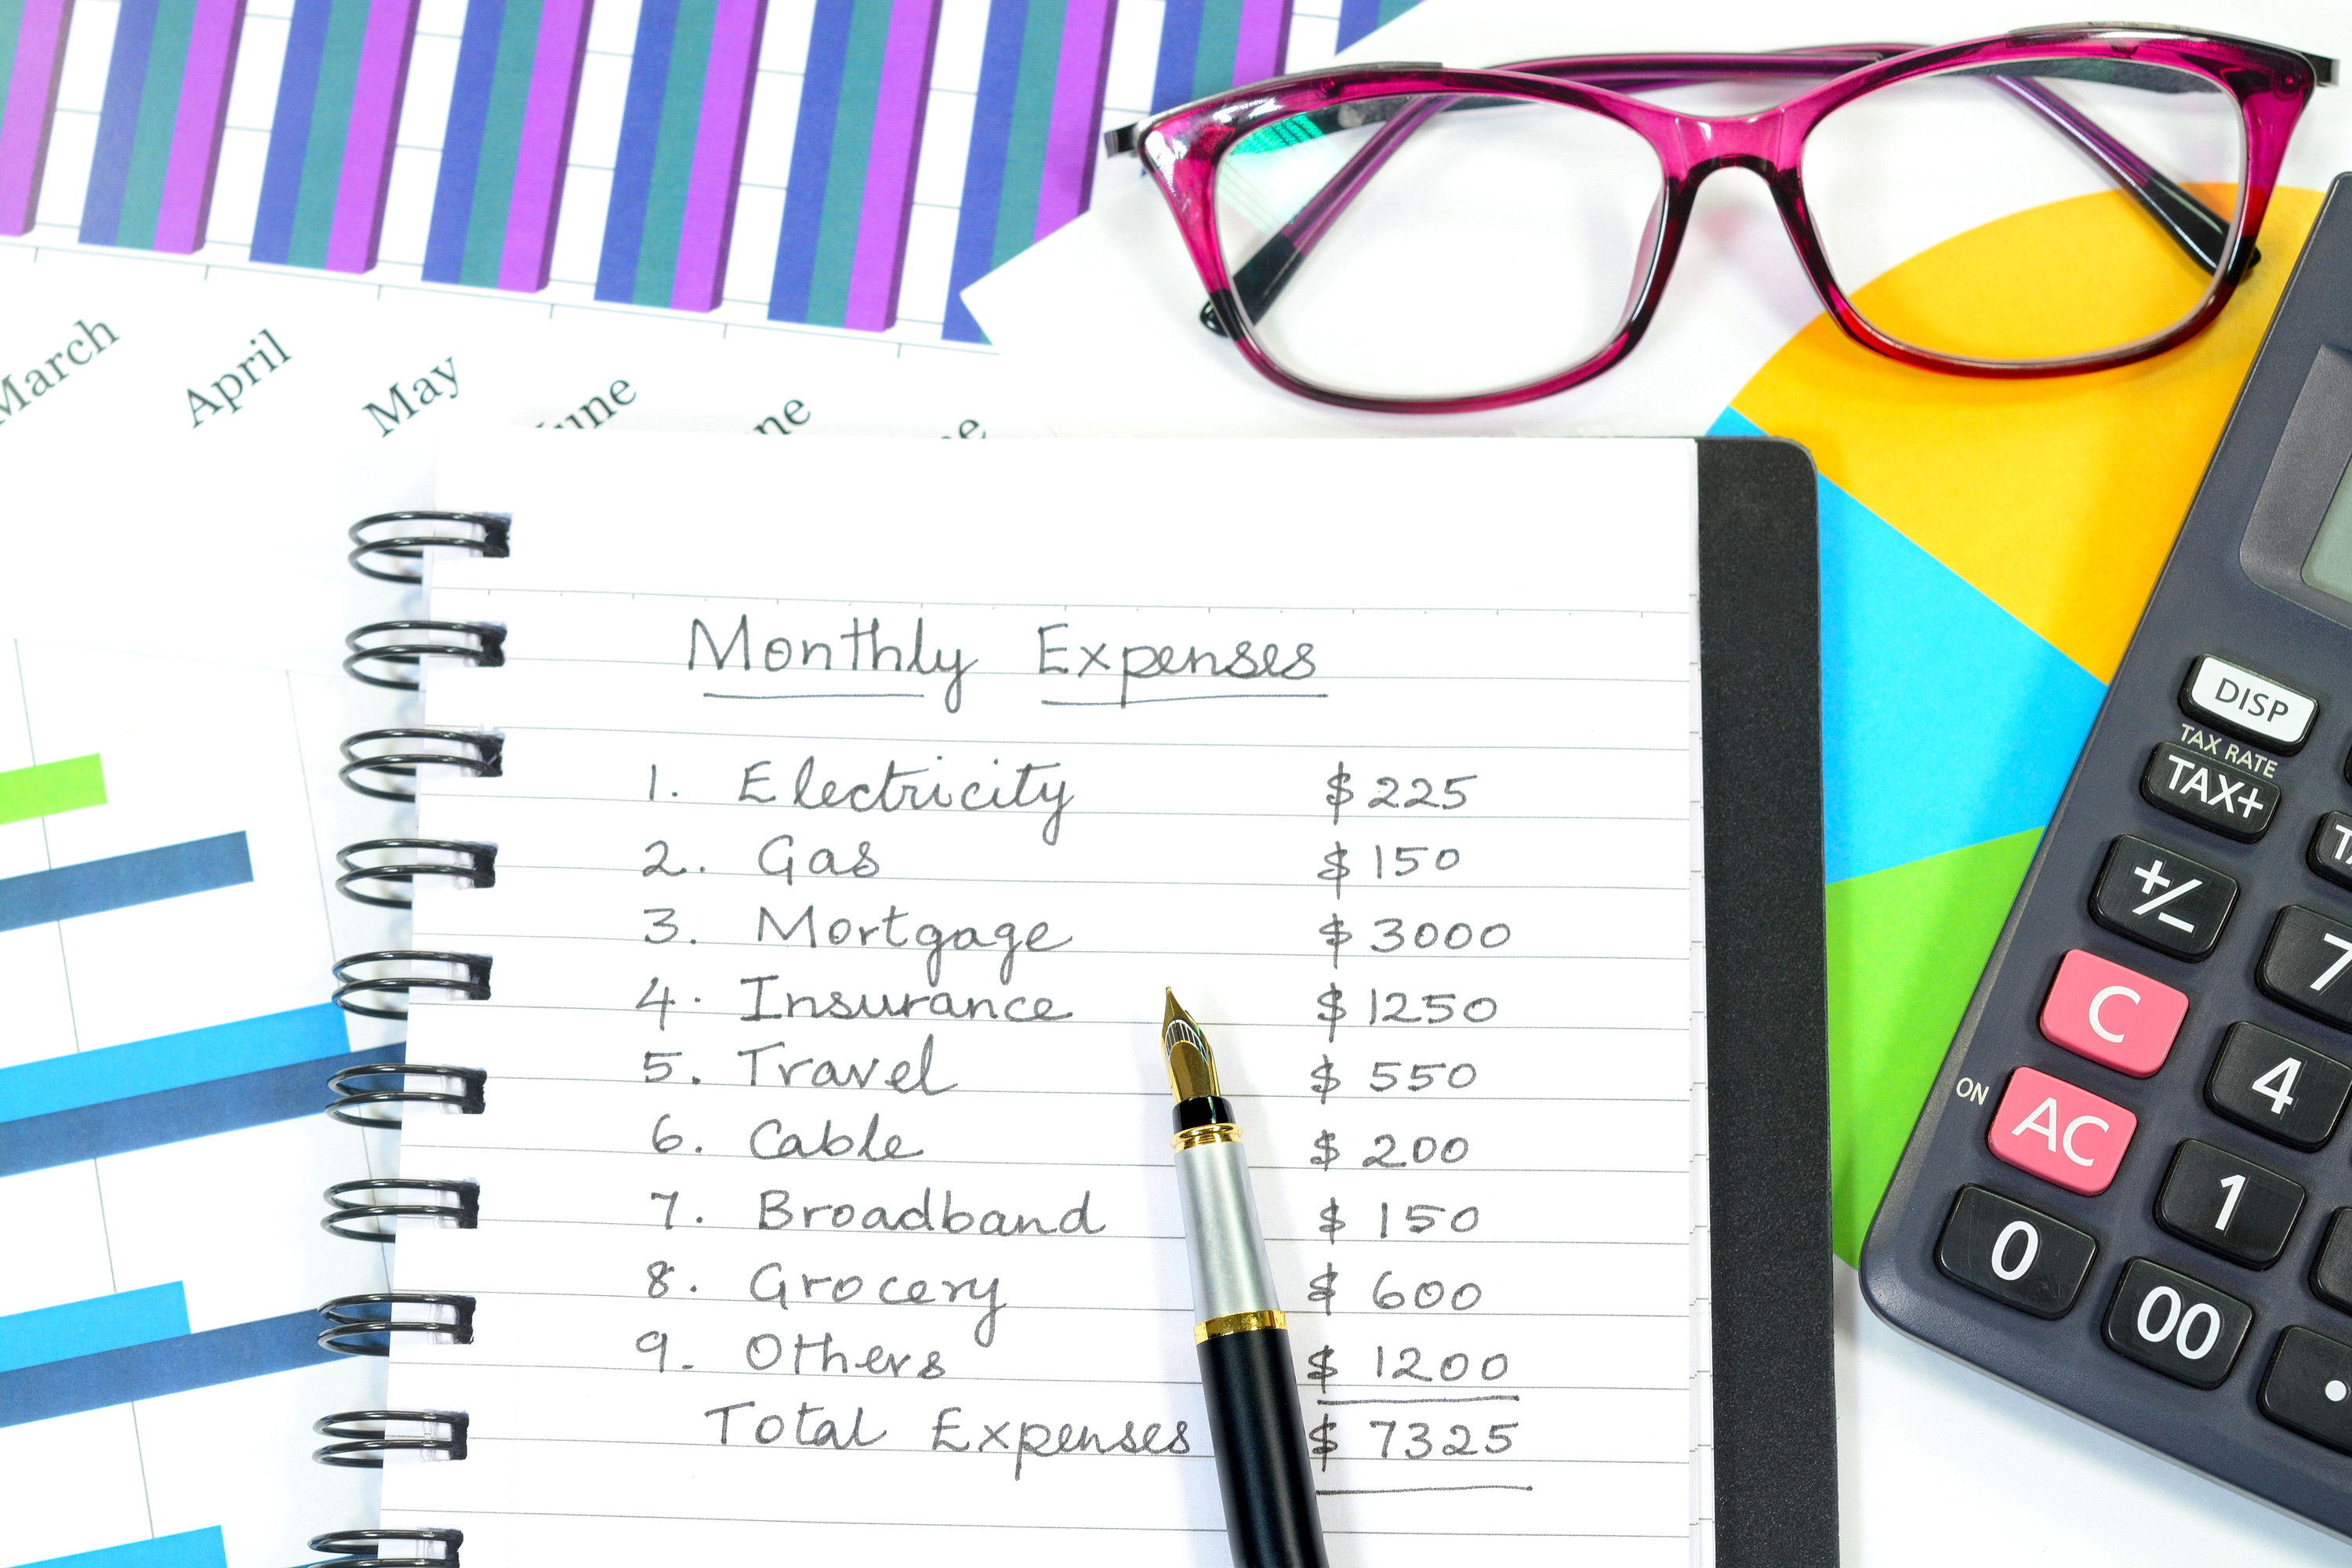 Monthly expenses written in a notebook